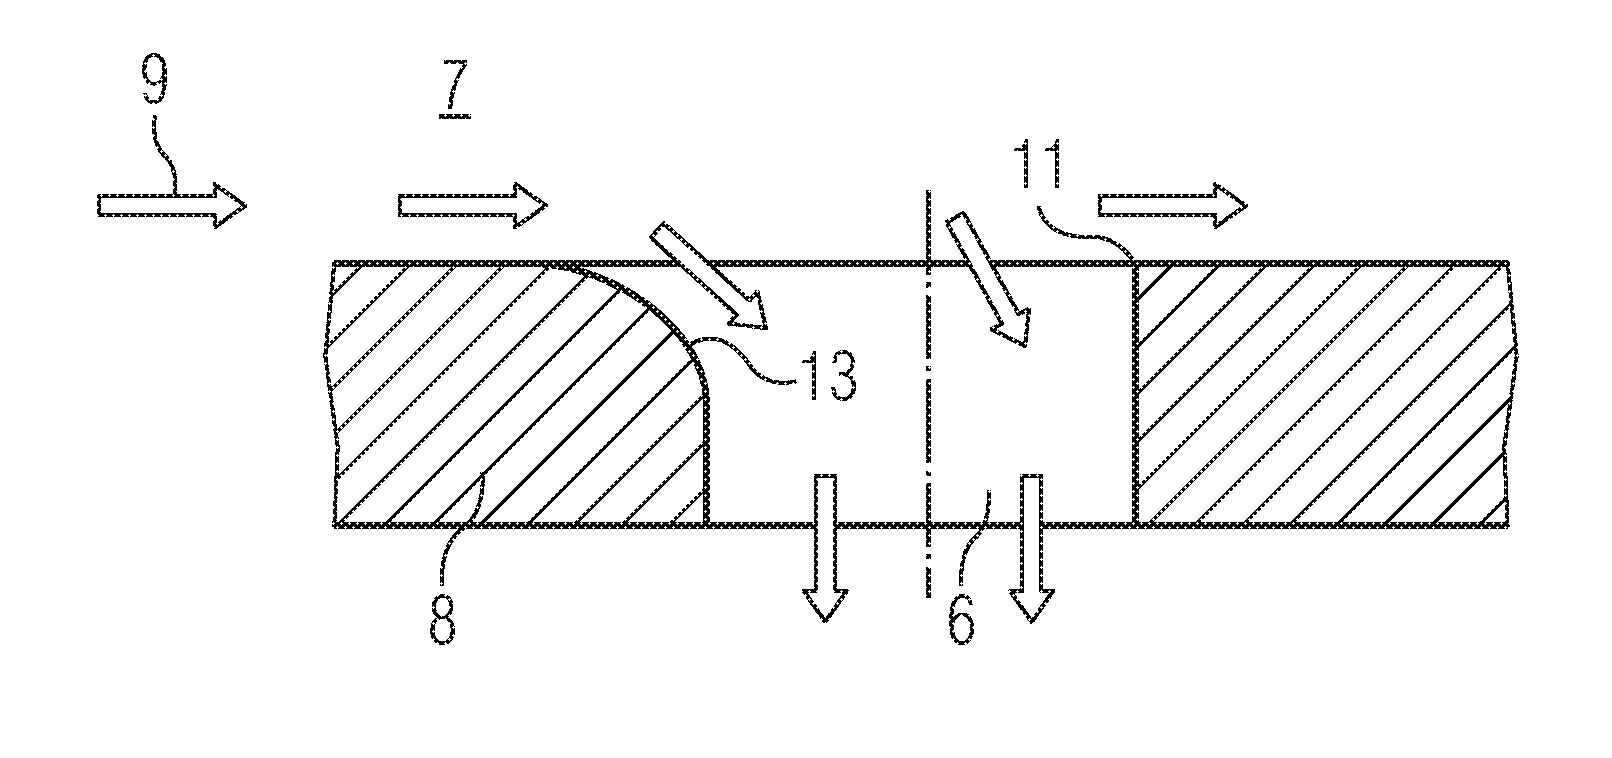 Eccentric chamfer at inlet of branches in a flow channel